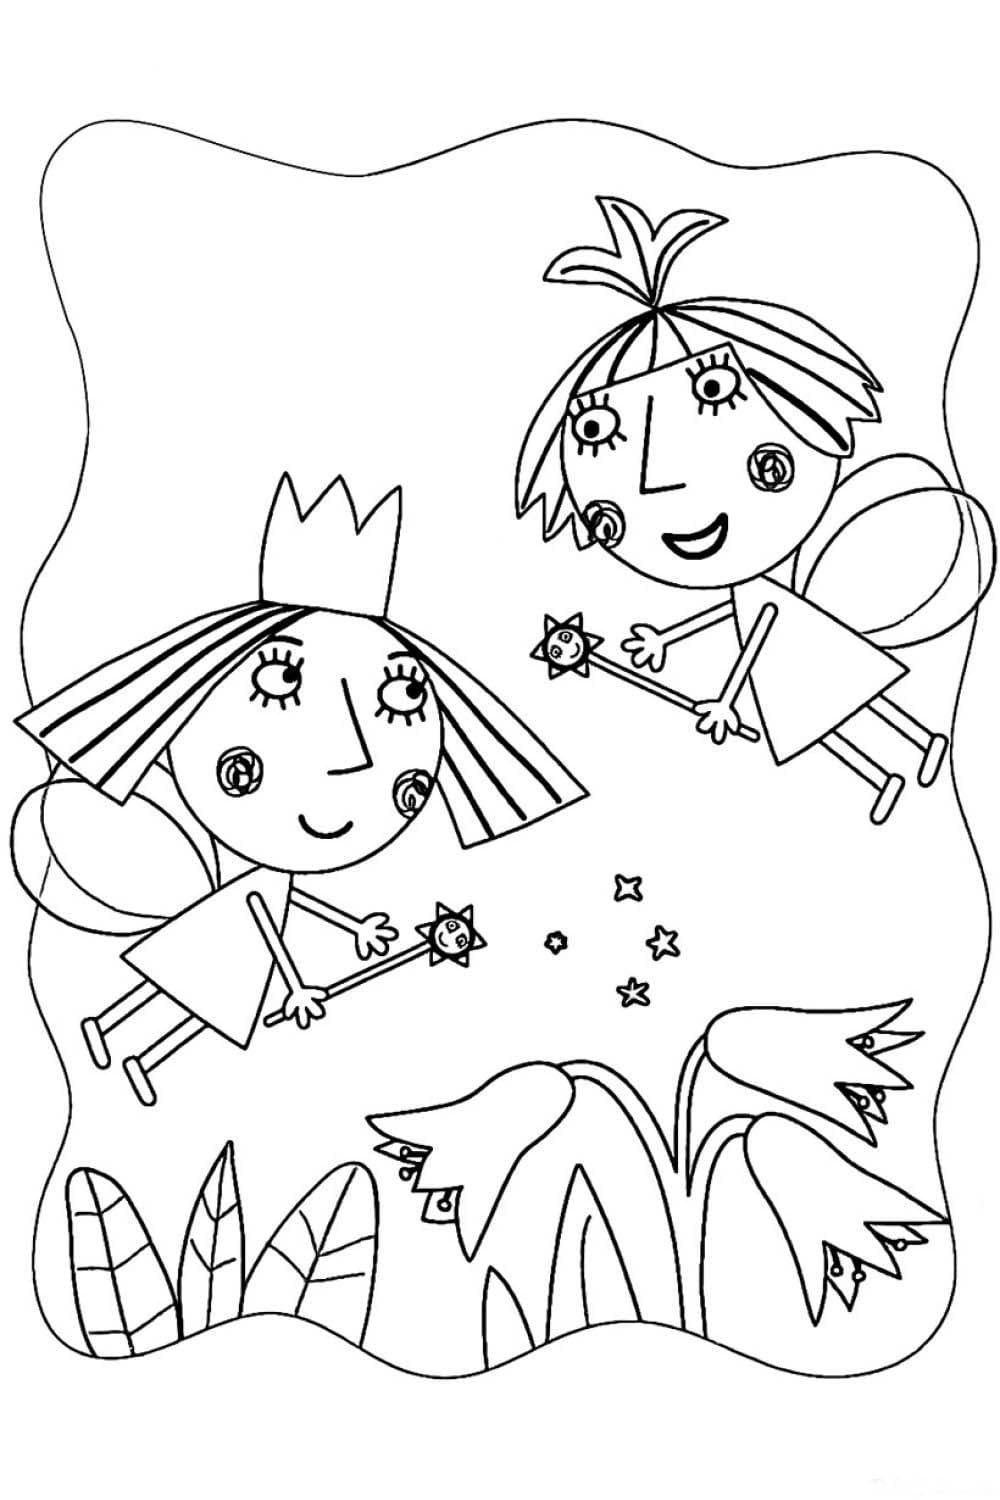 Ben and Holly coloring pages - Printable coloring pages